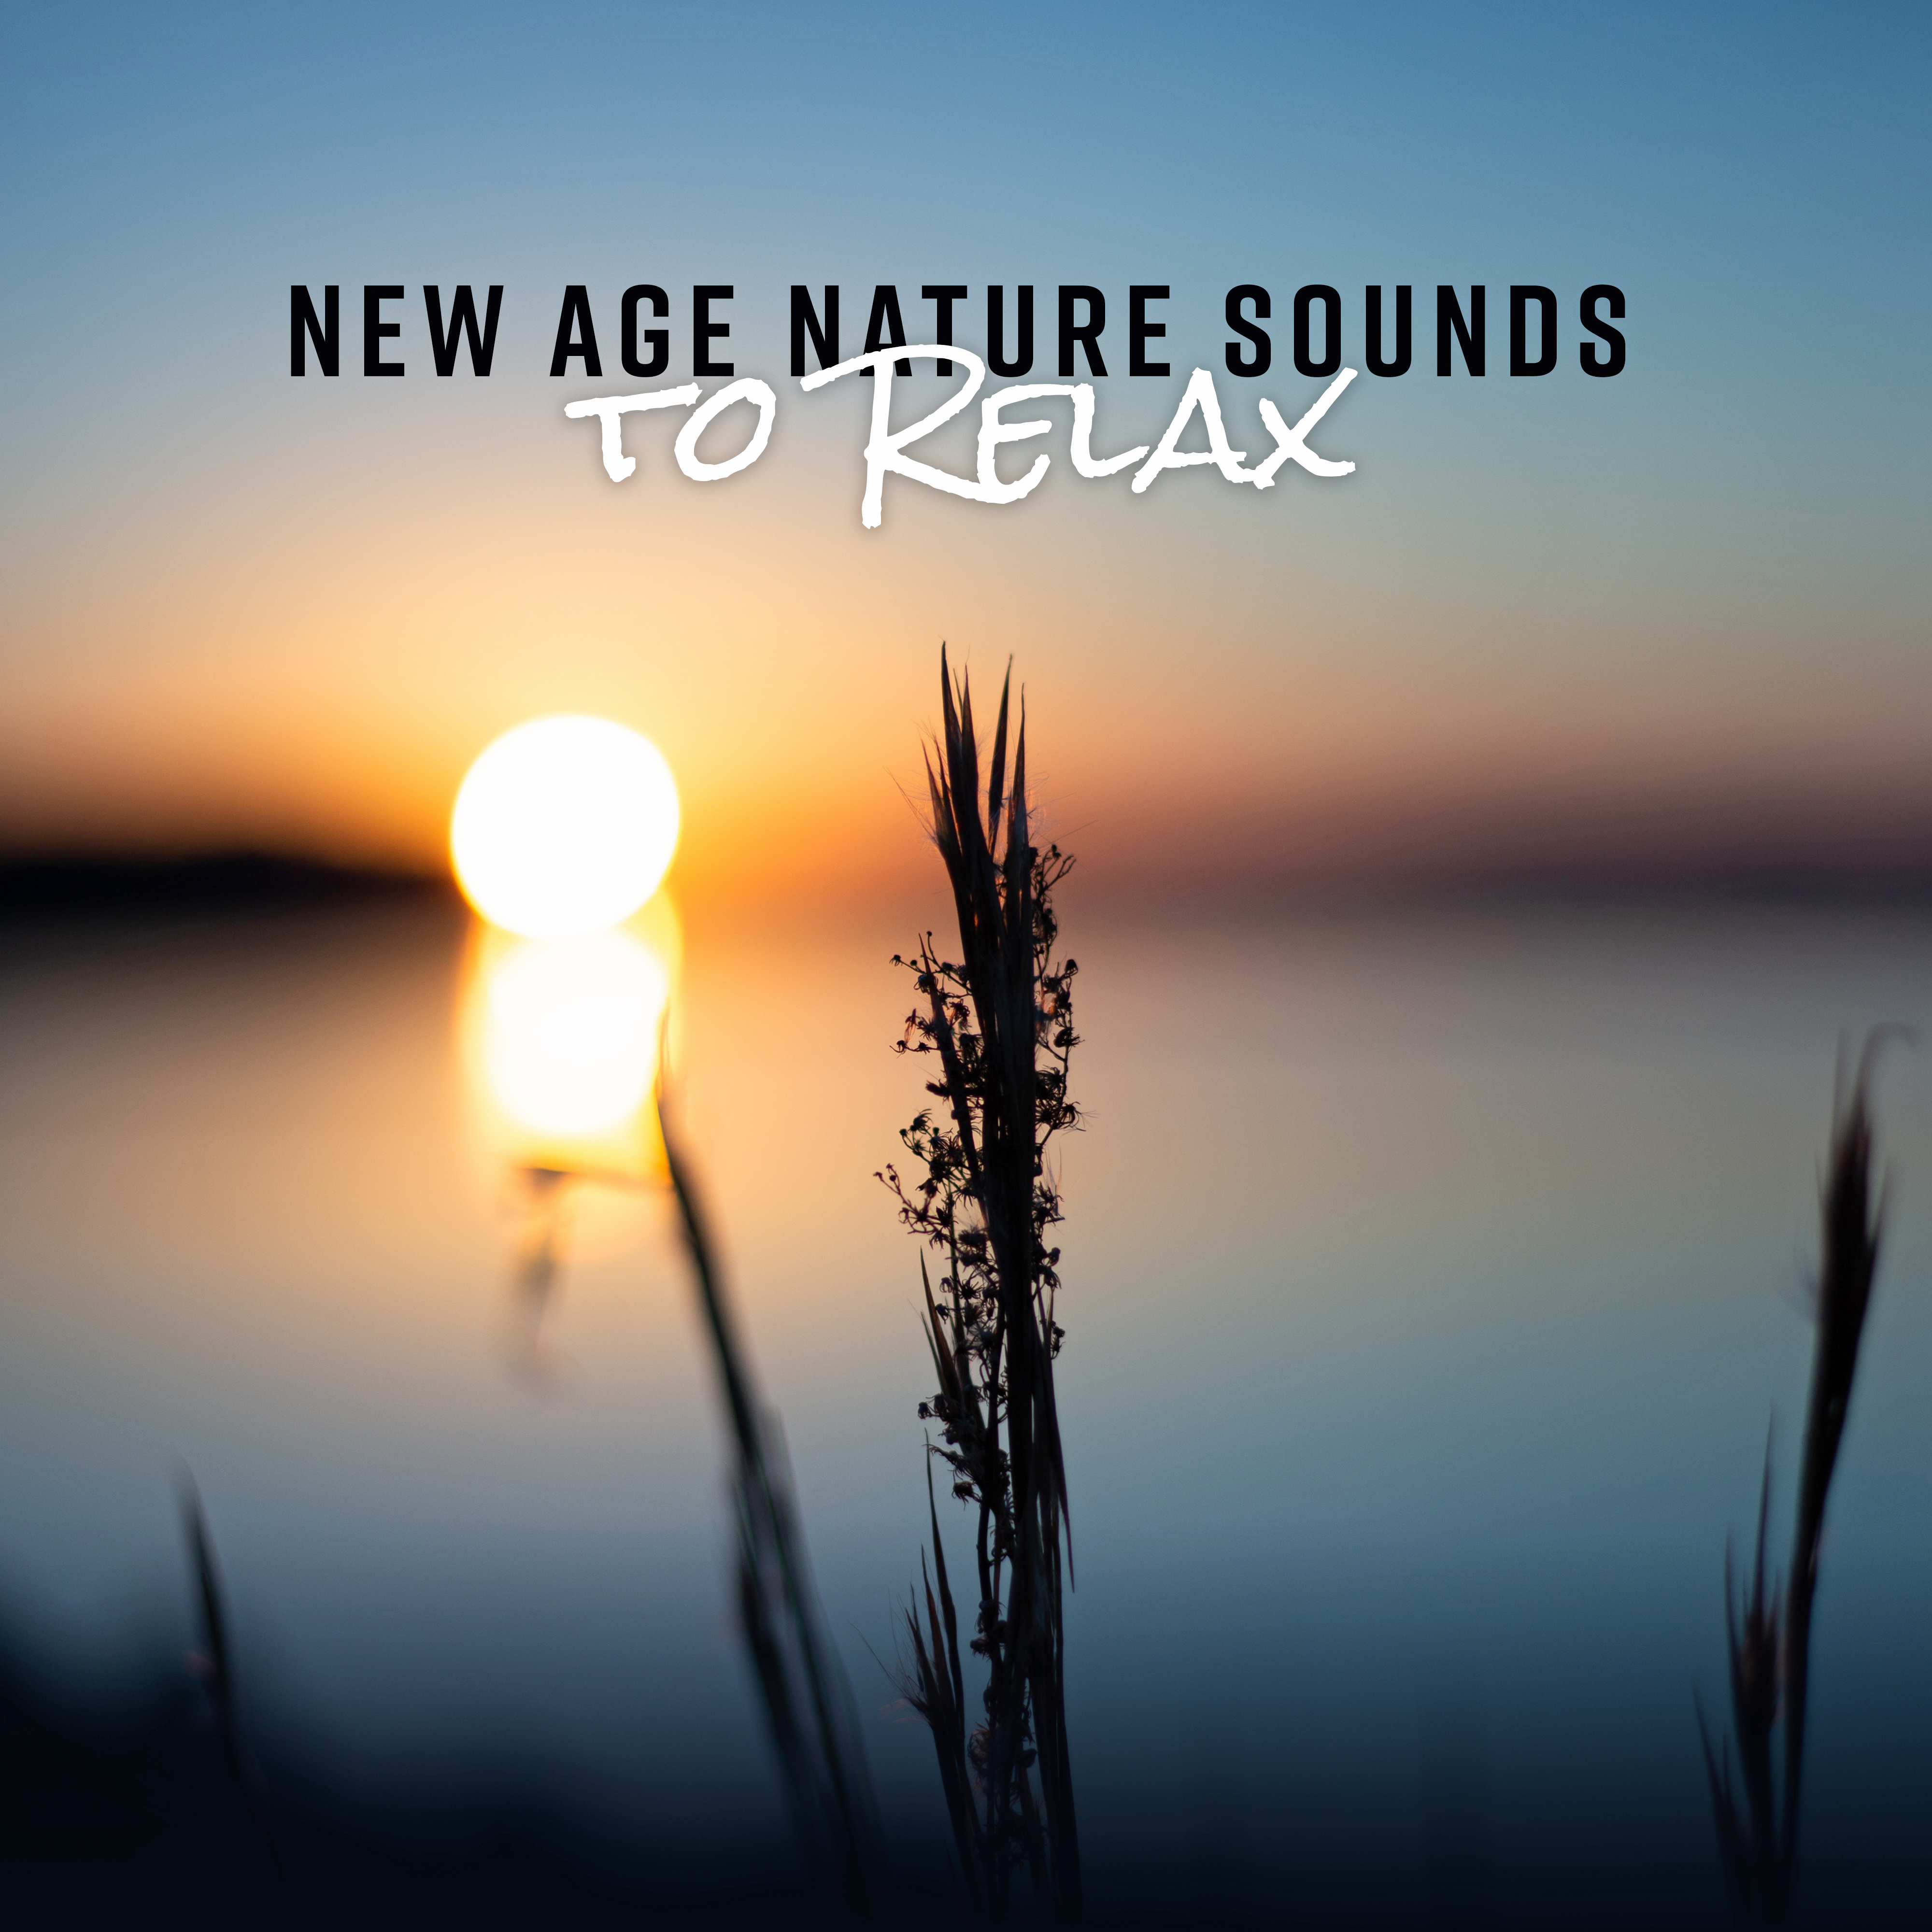 New Age Nature Sounds to Relax